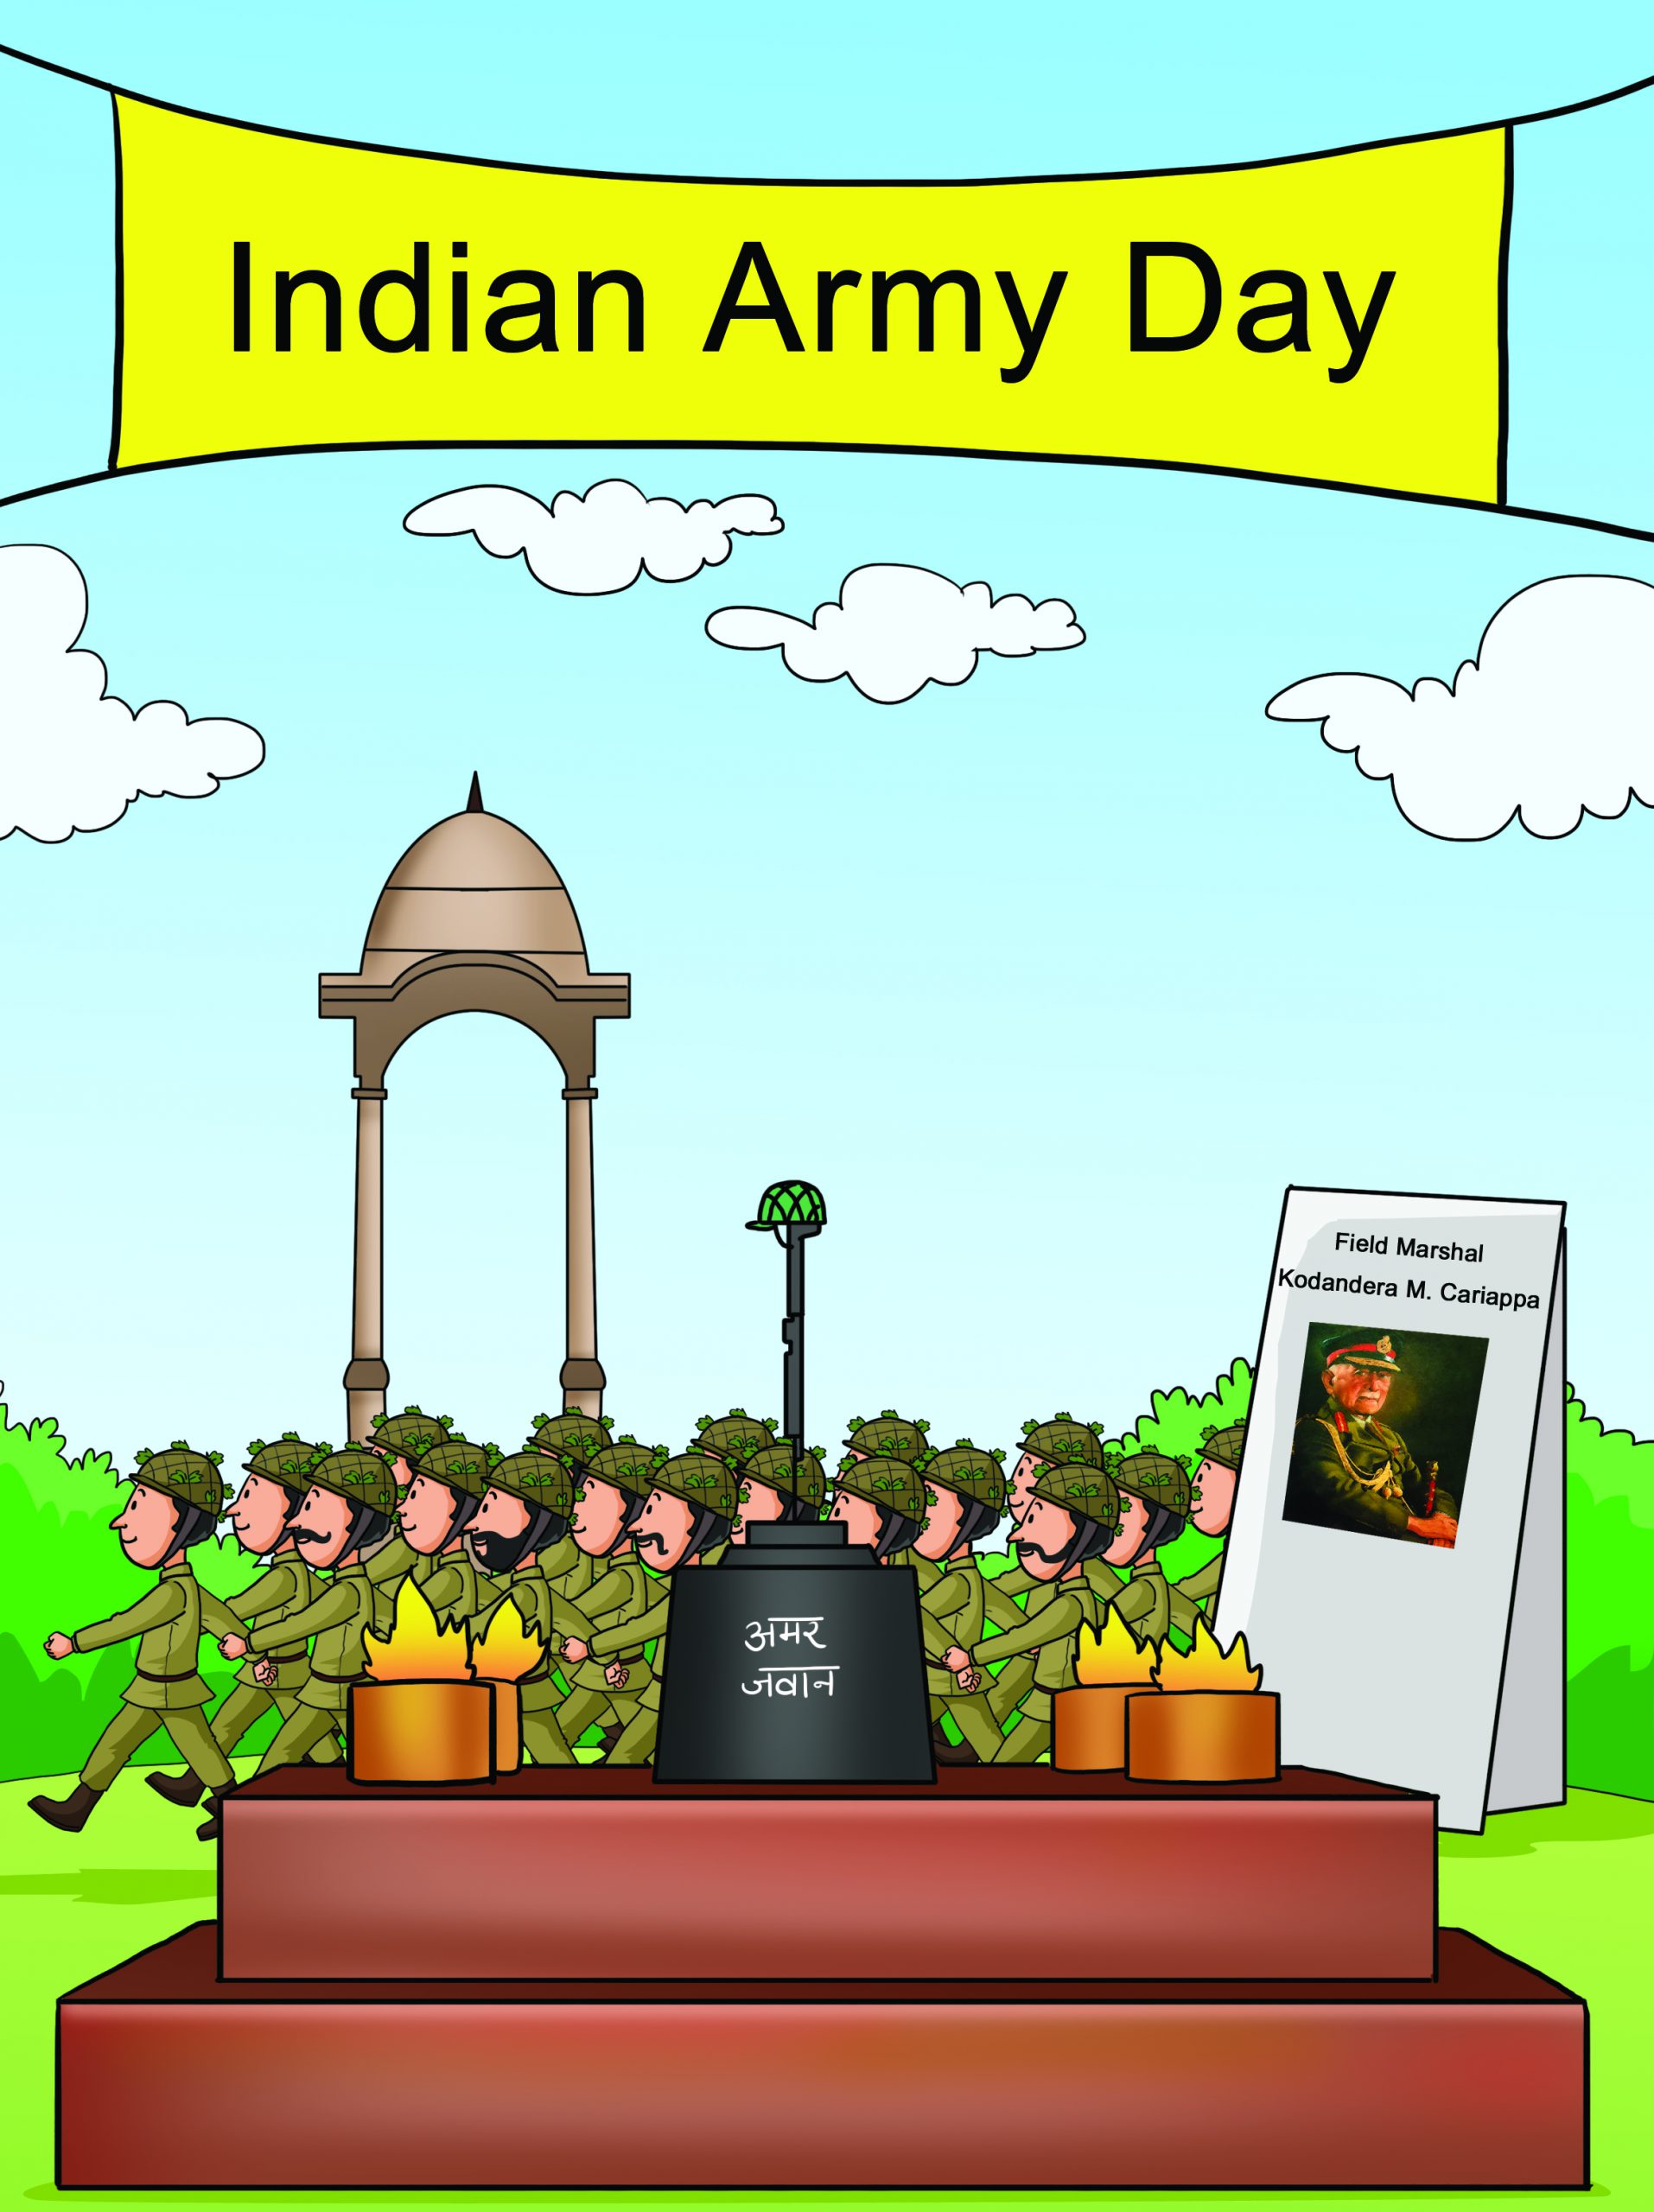 Indian Army Day!